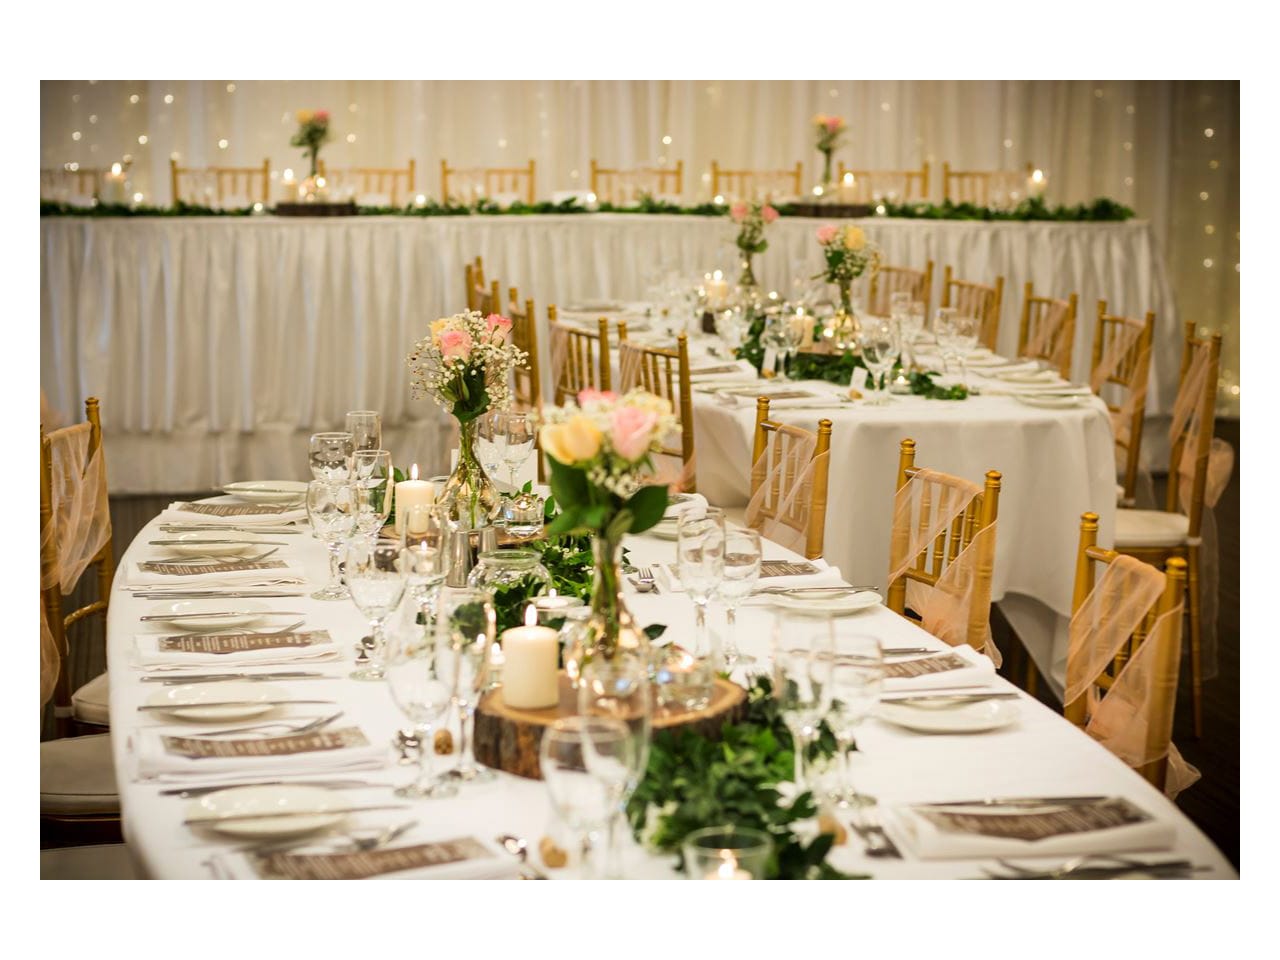 Room set for wedding reception with white and pink tables and wooden chairs